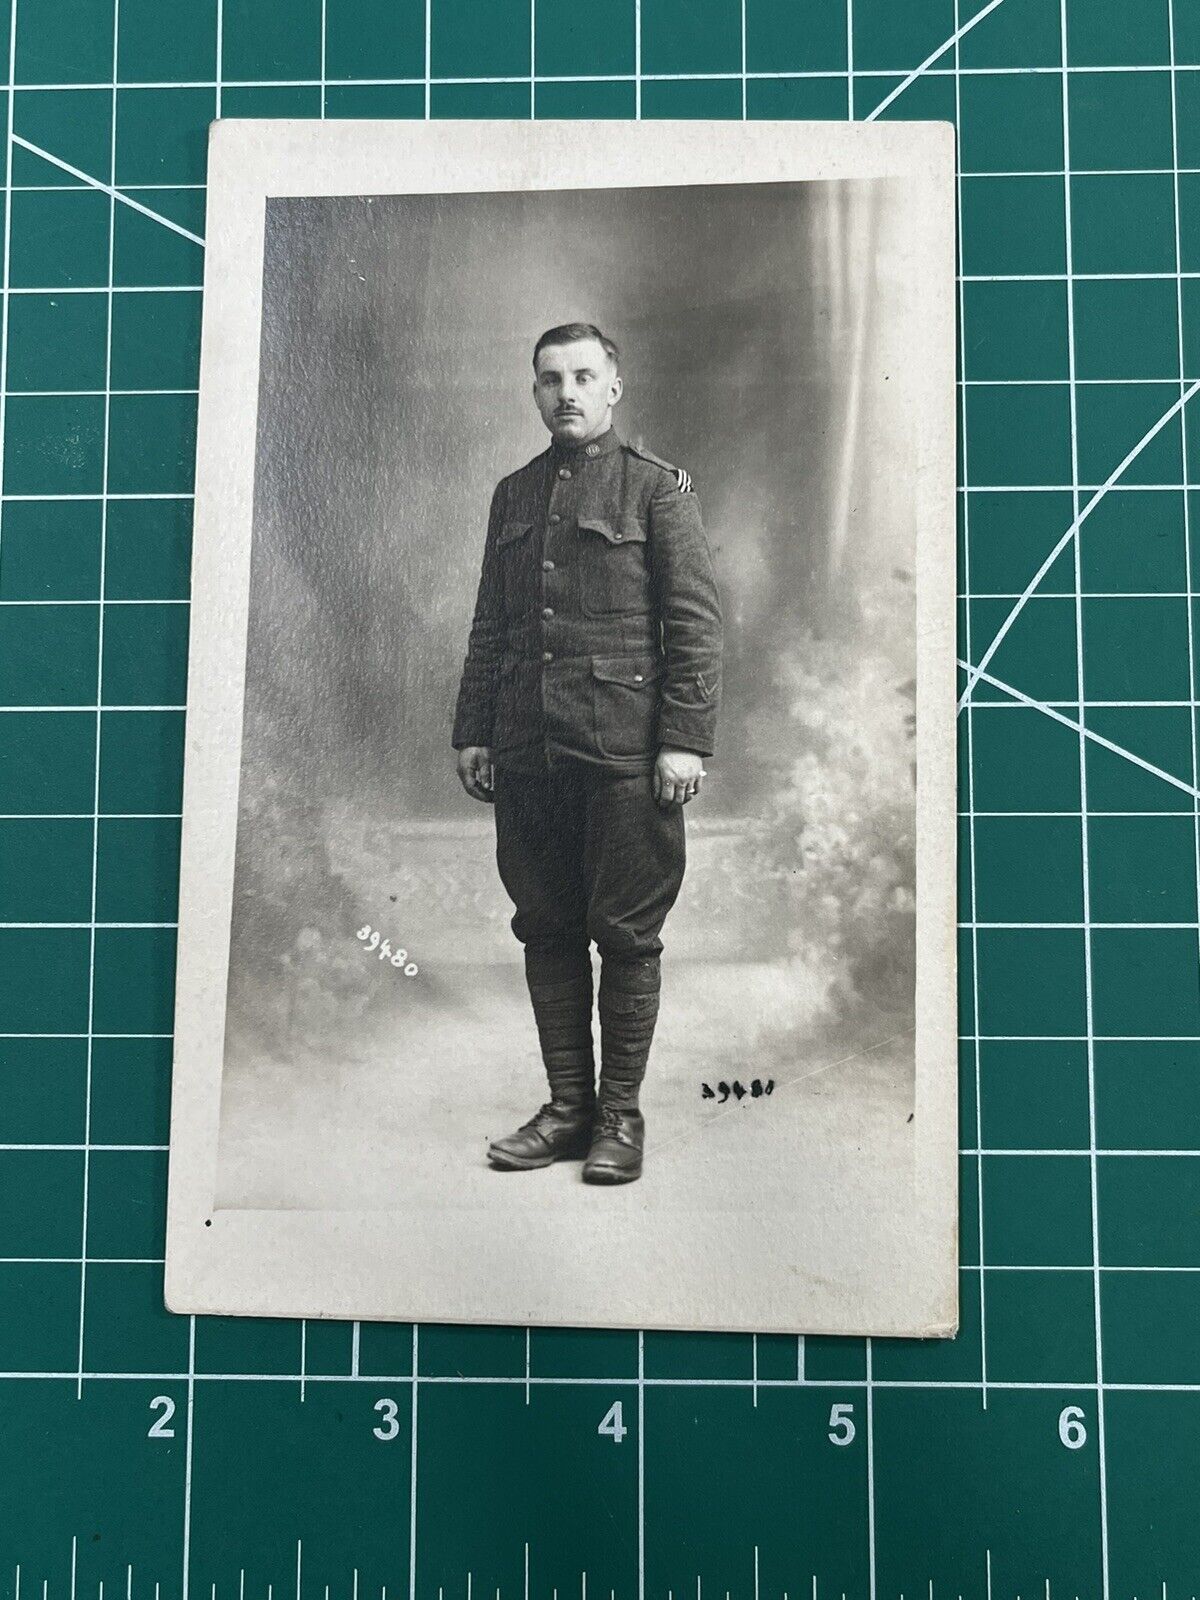 WW1 Doughboy Soldier Photo 3rd Infantry Division Patch Visible  Studio Photo